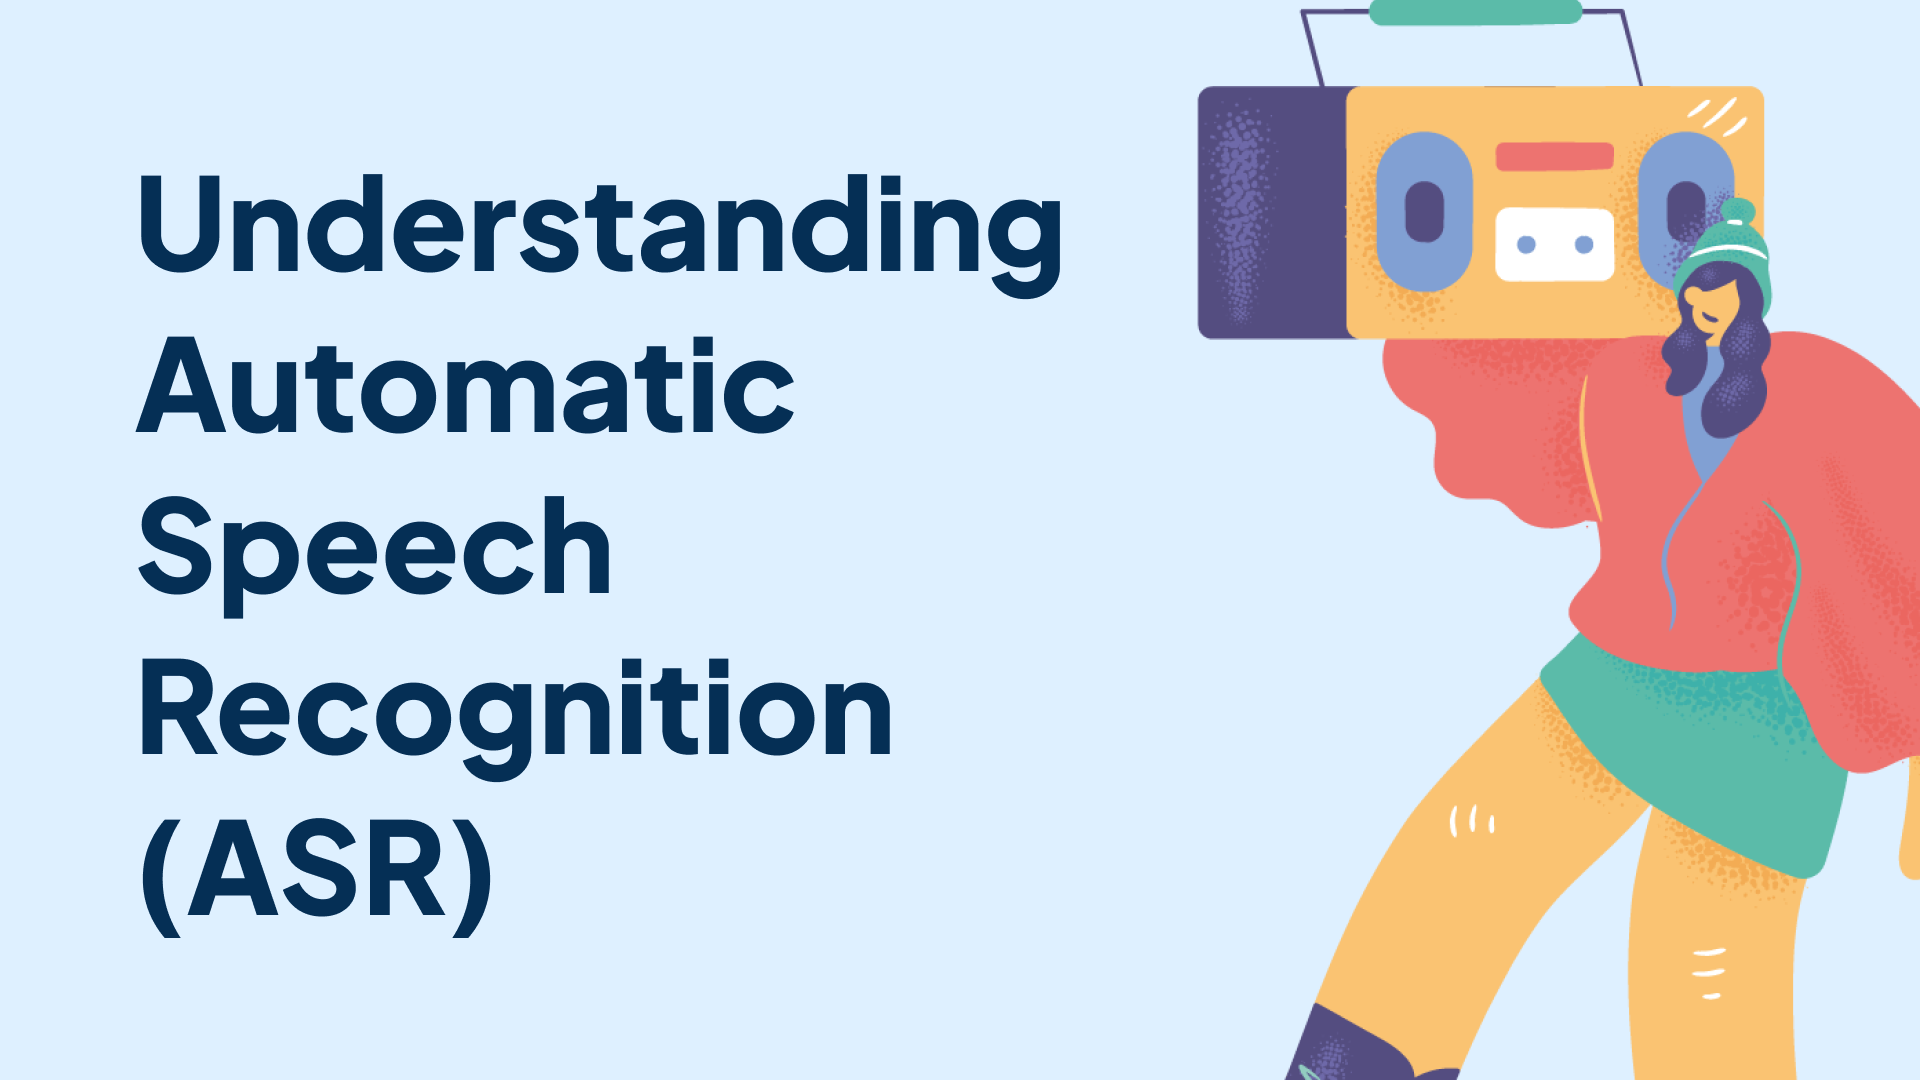 What is Automatic Speech Recognition (ASR) Technology?